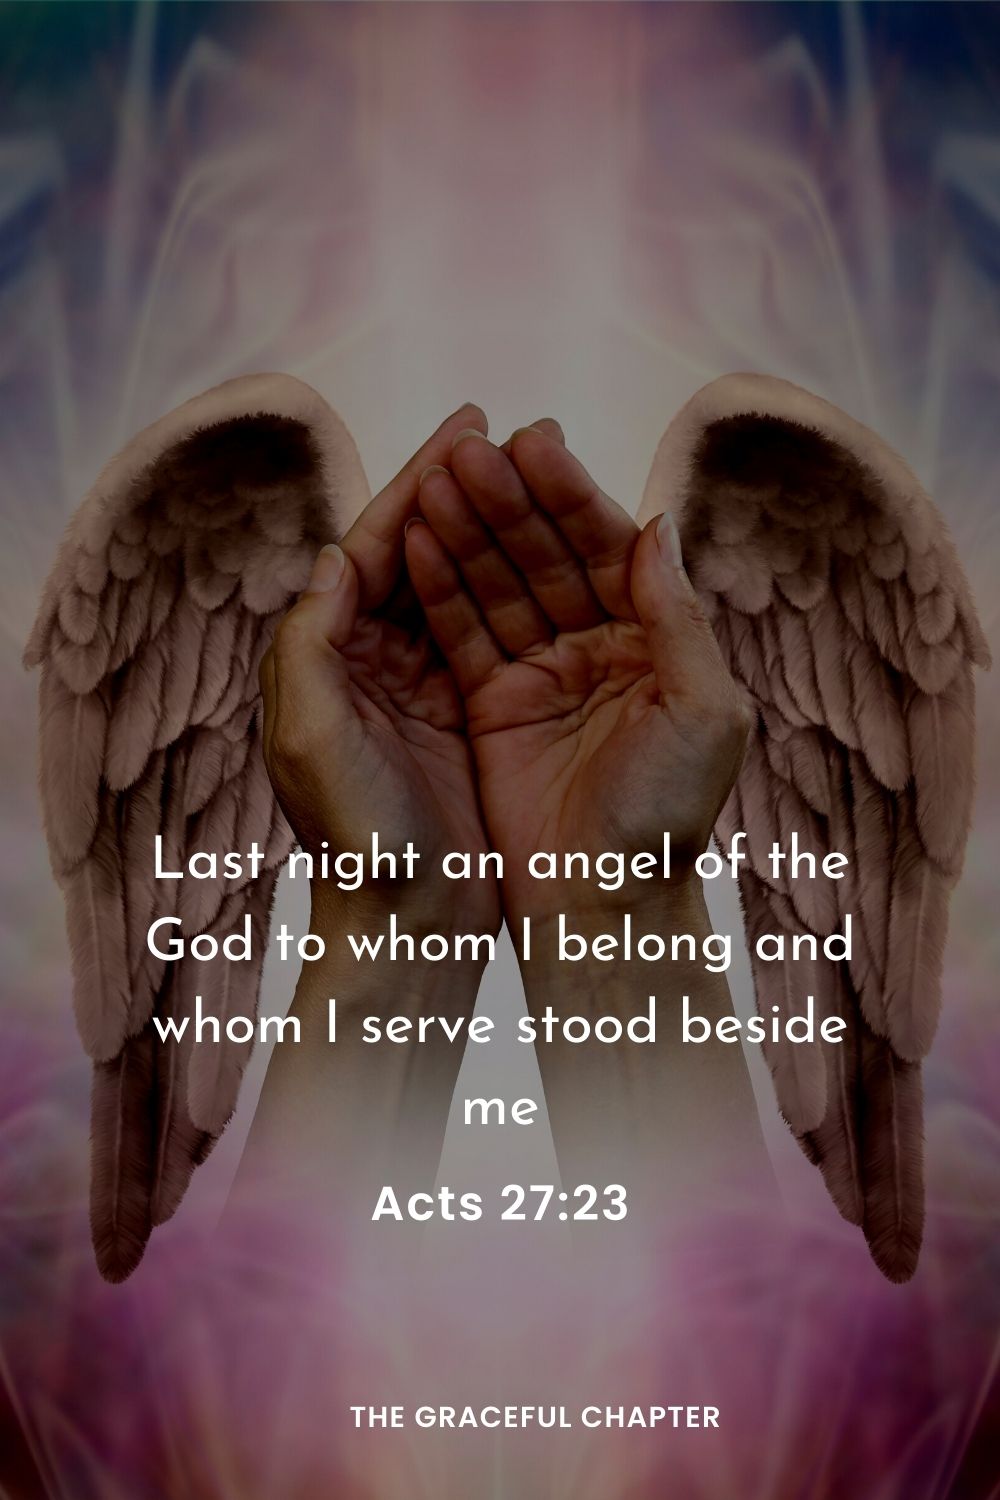 Last night an angel of the God to whom I belong and whom I serve stood beside me